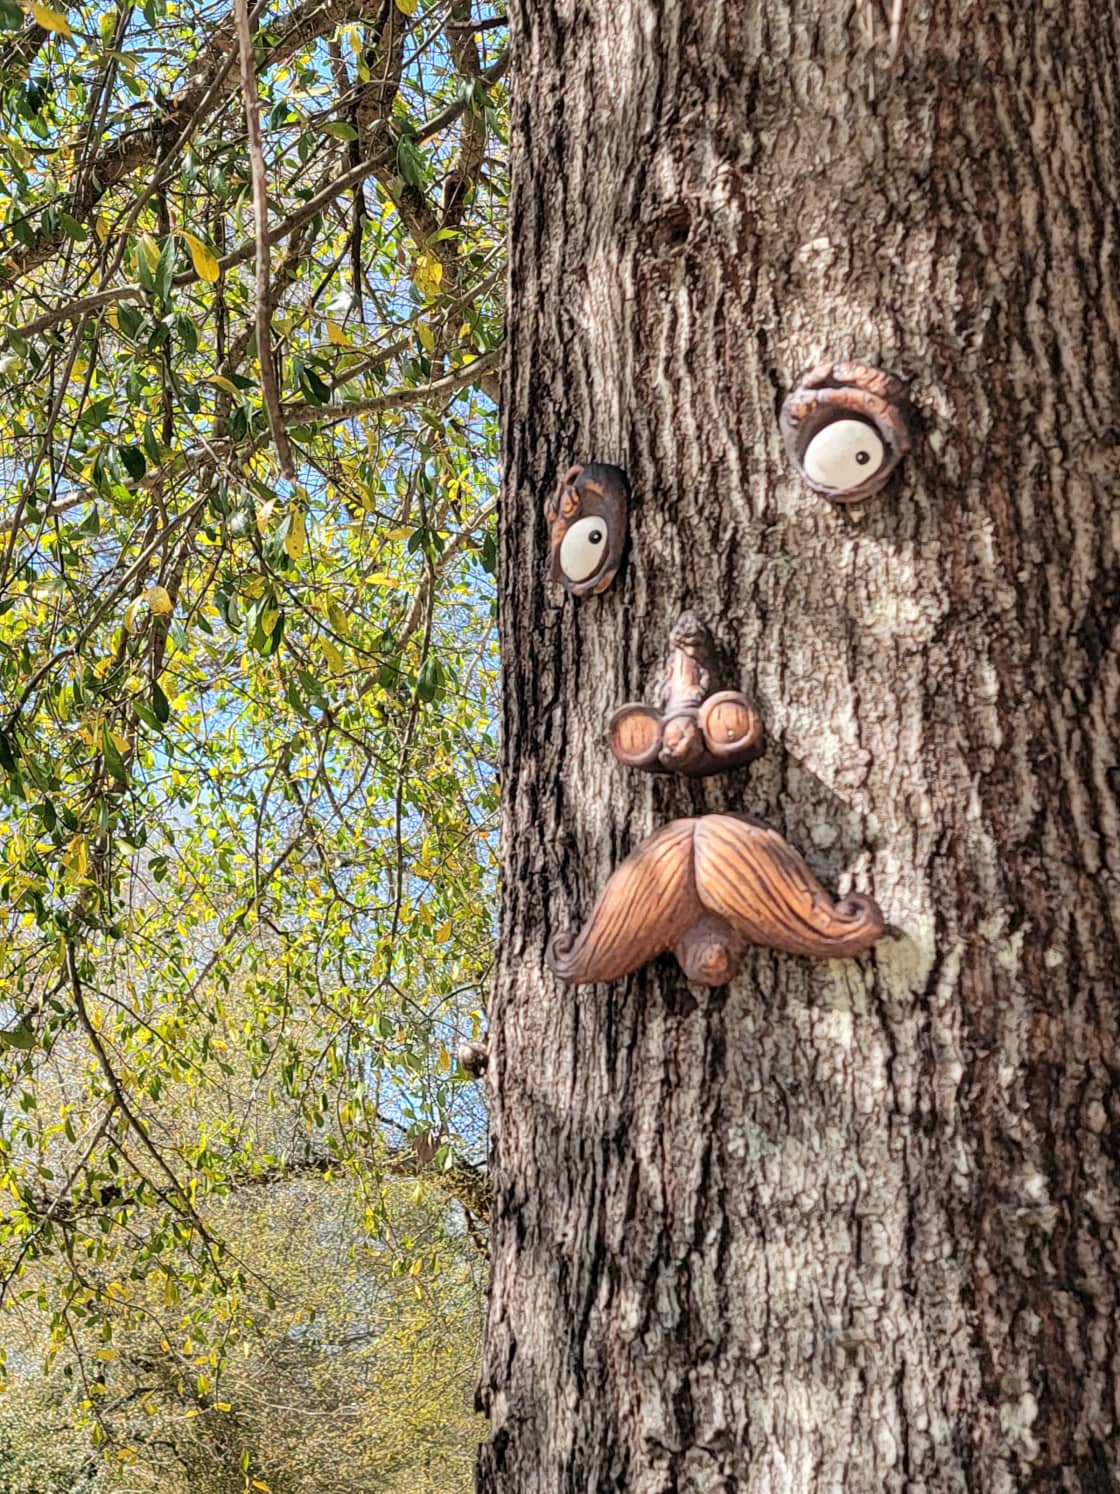 Enjoy walking through the campground finding surprises amongst the beautiful oaks.